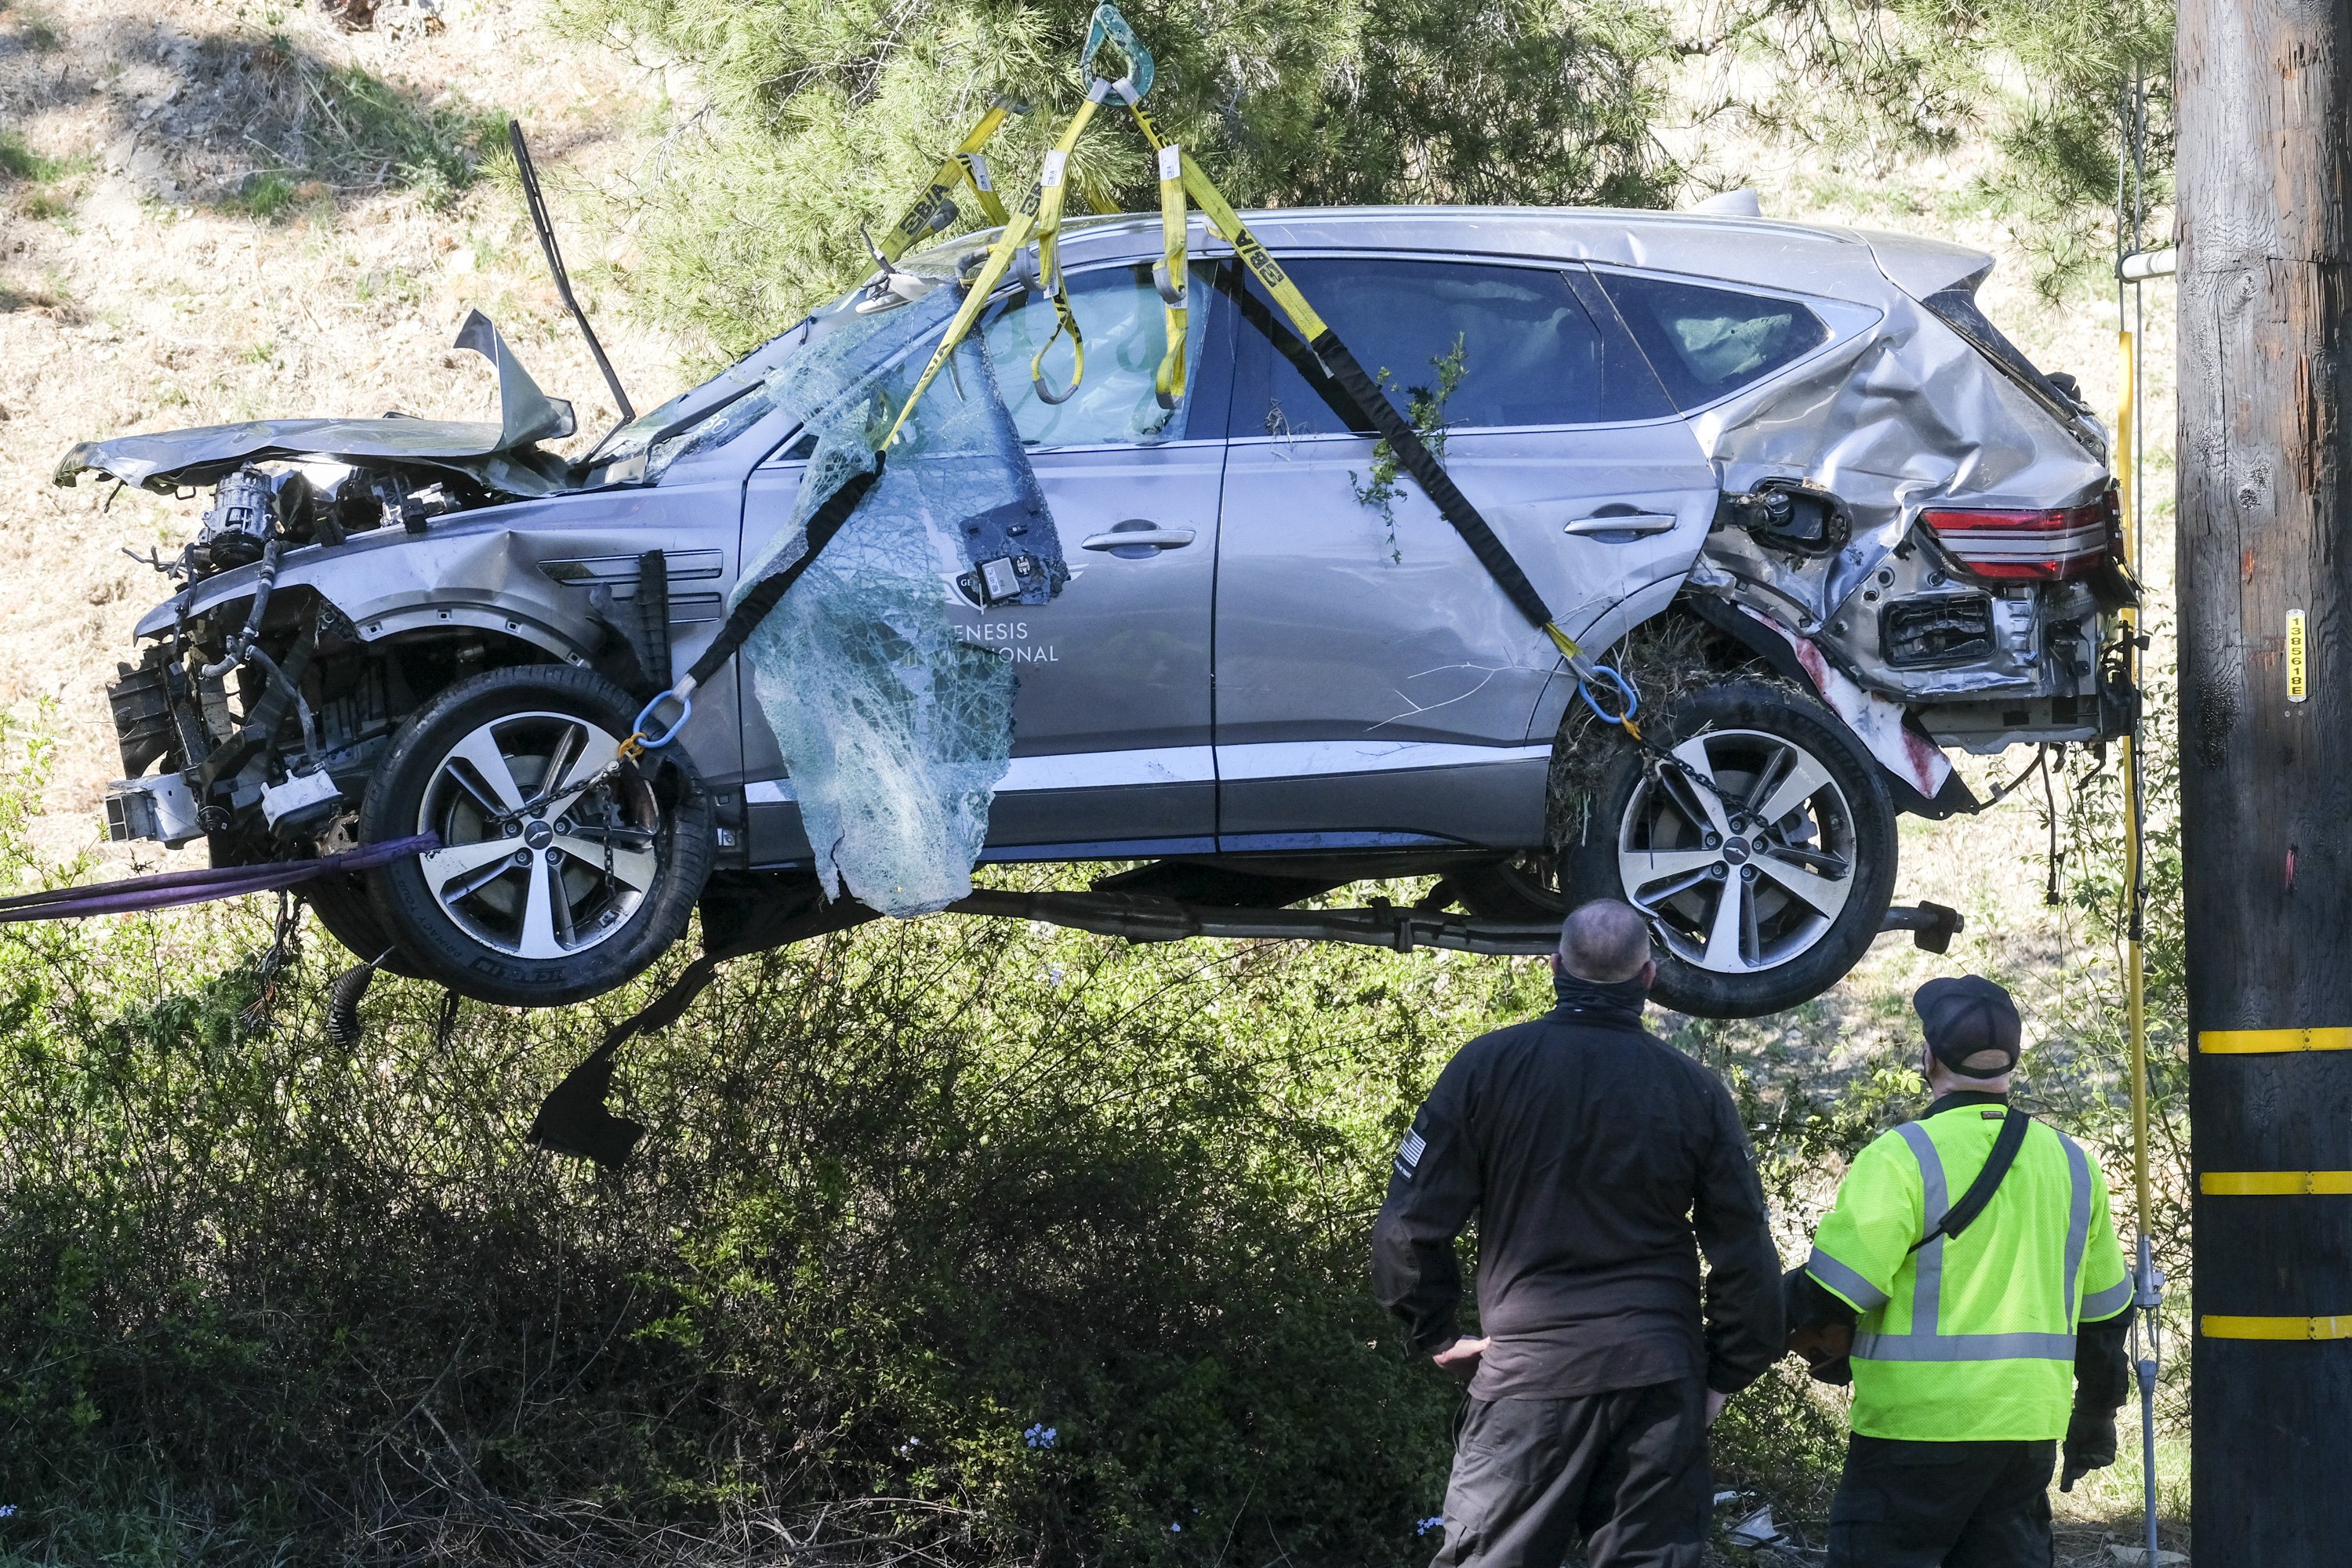 The Los Angeles sheriff will reveal the cause of the Tiger Woods crash